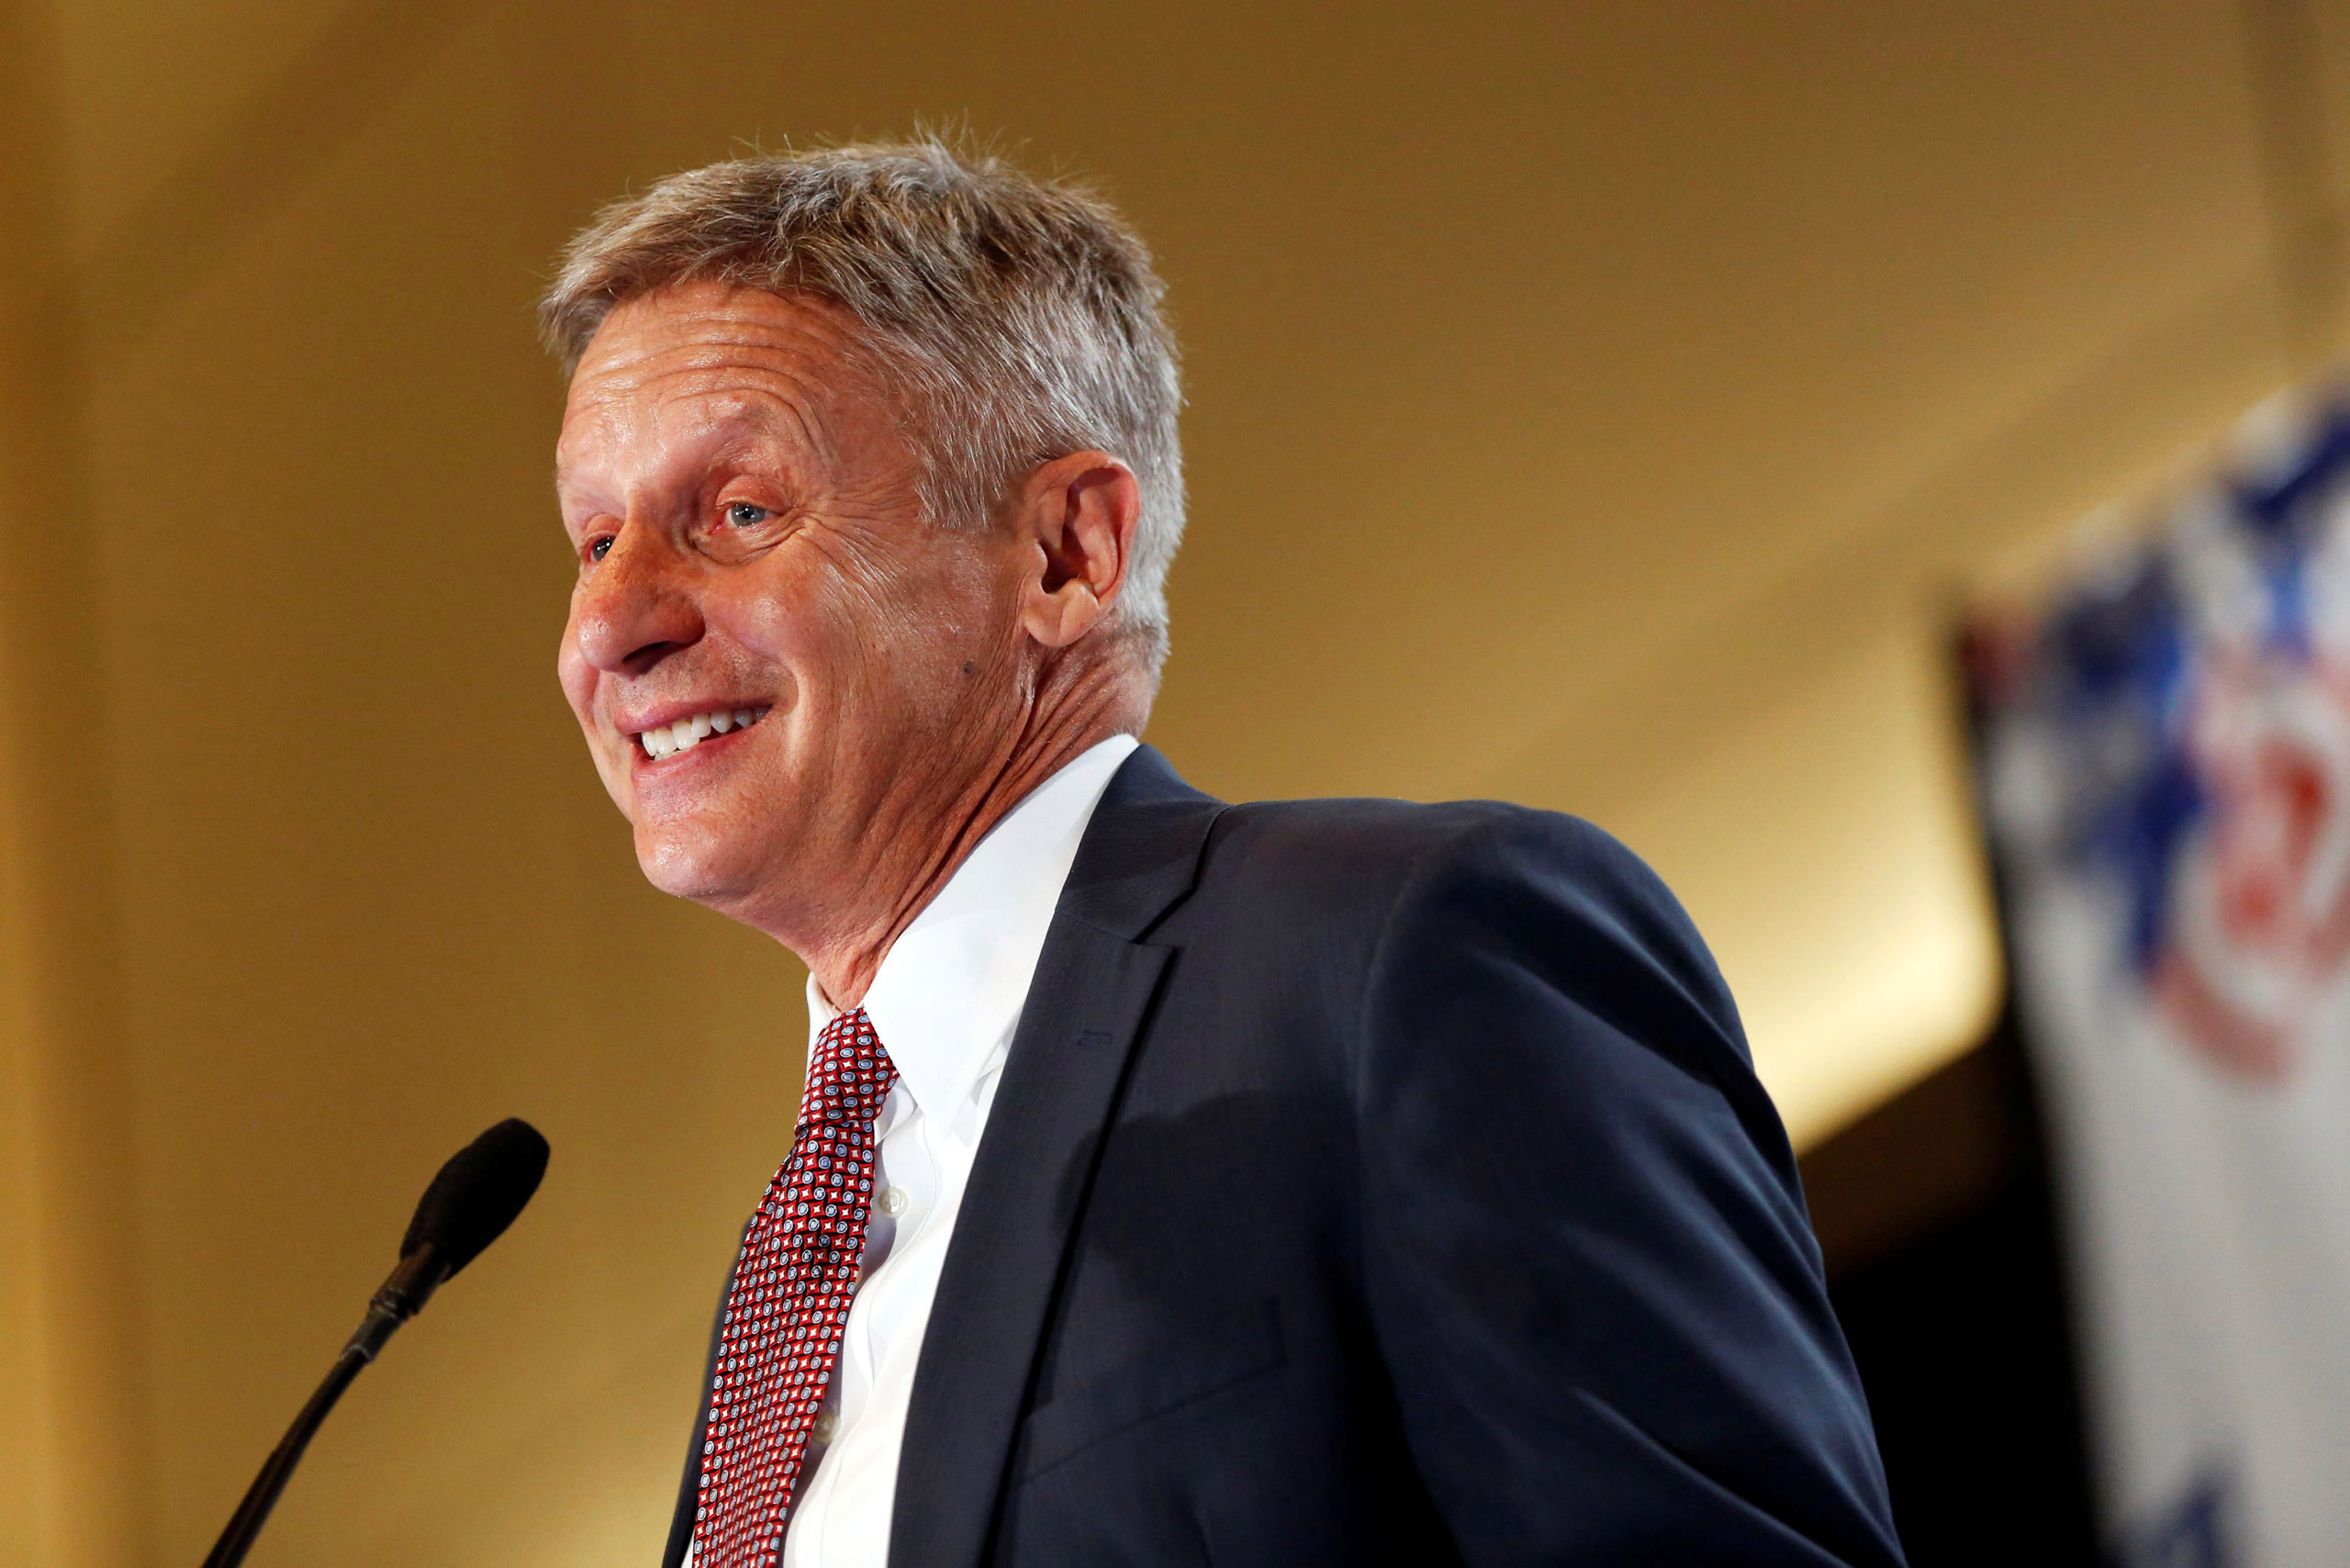 U.S. Libertarian Party presidential candidate Gary Johnson speaks during the "Politicon" convention in Pasadena